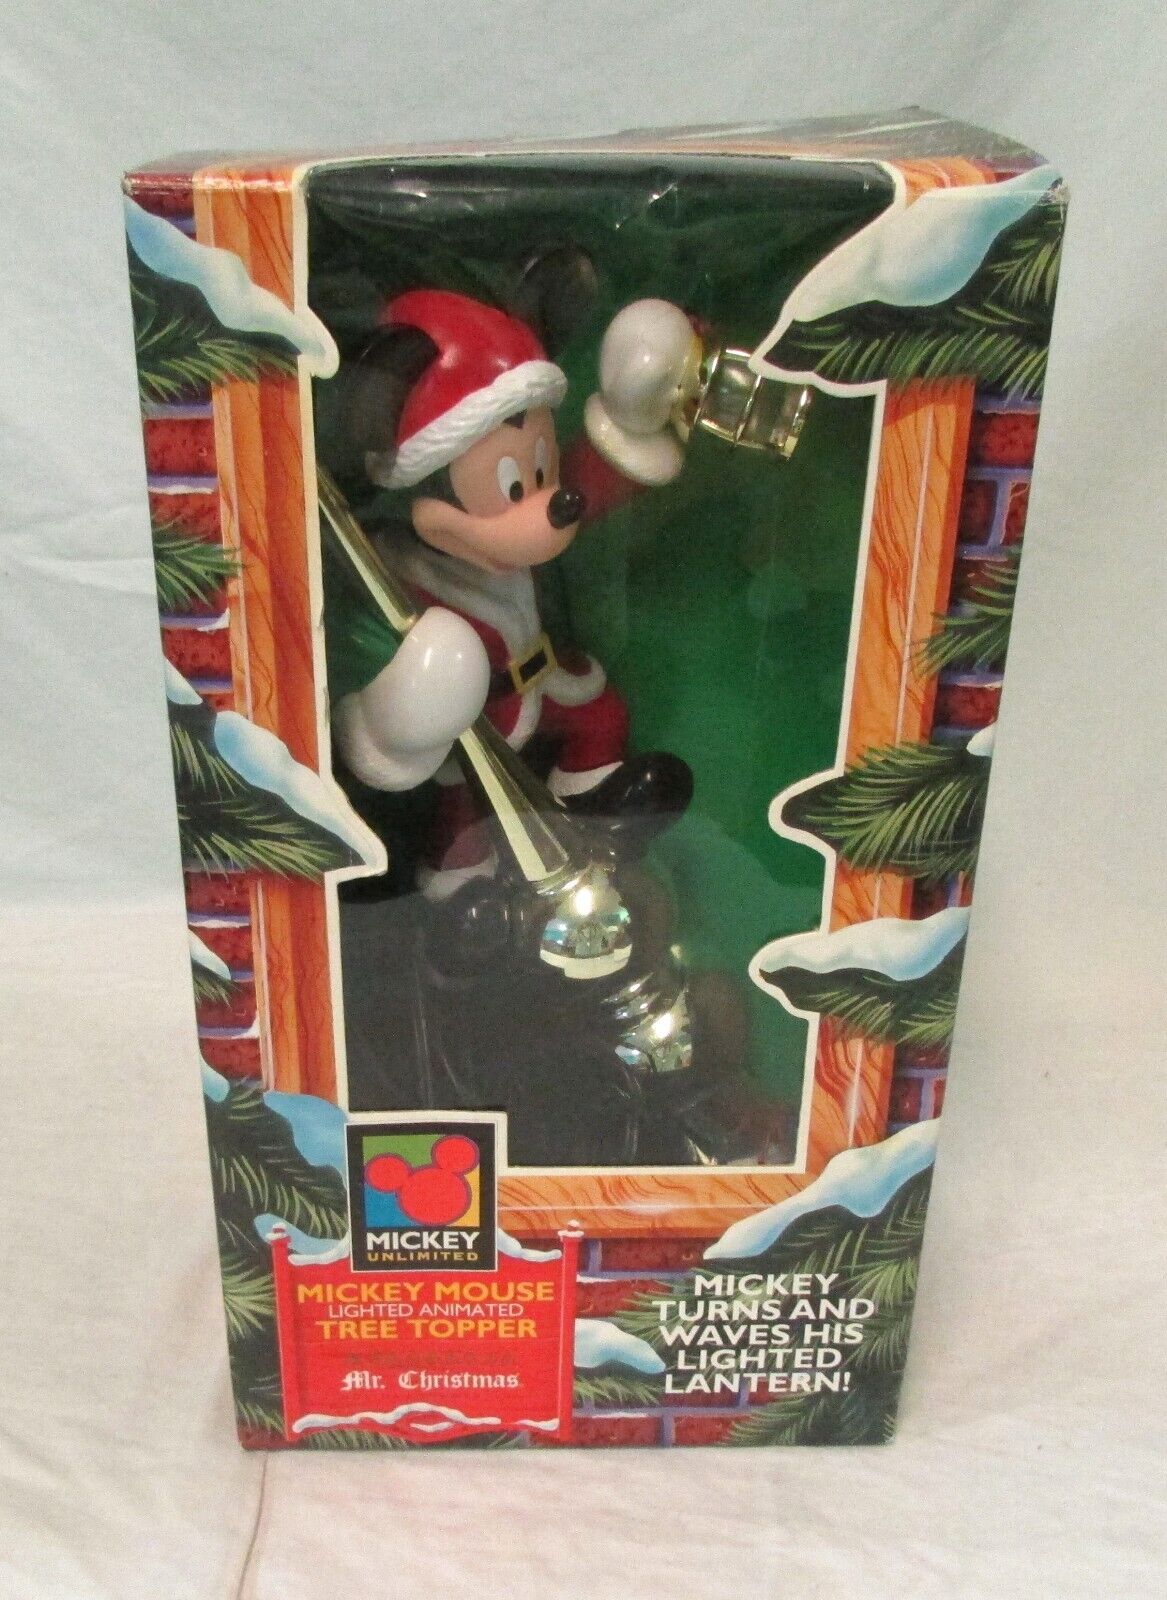 Mr Christmas Disney Mickey Mouse Santa Animated Lighted Tree Topper 1990s Works